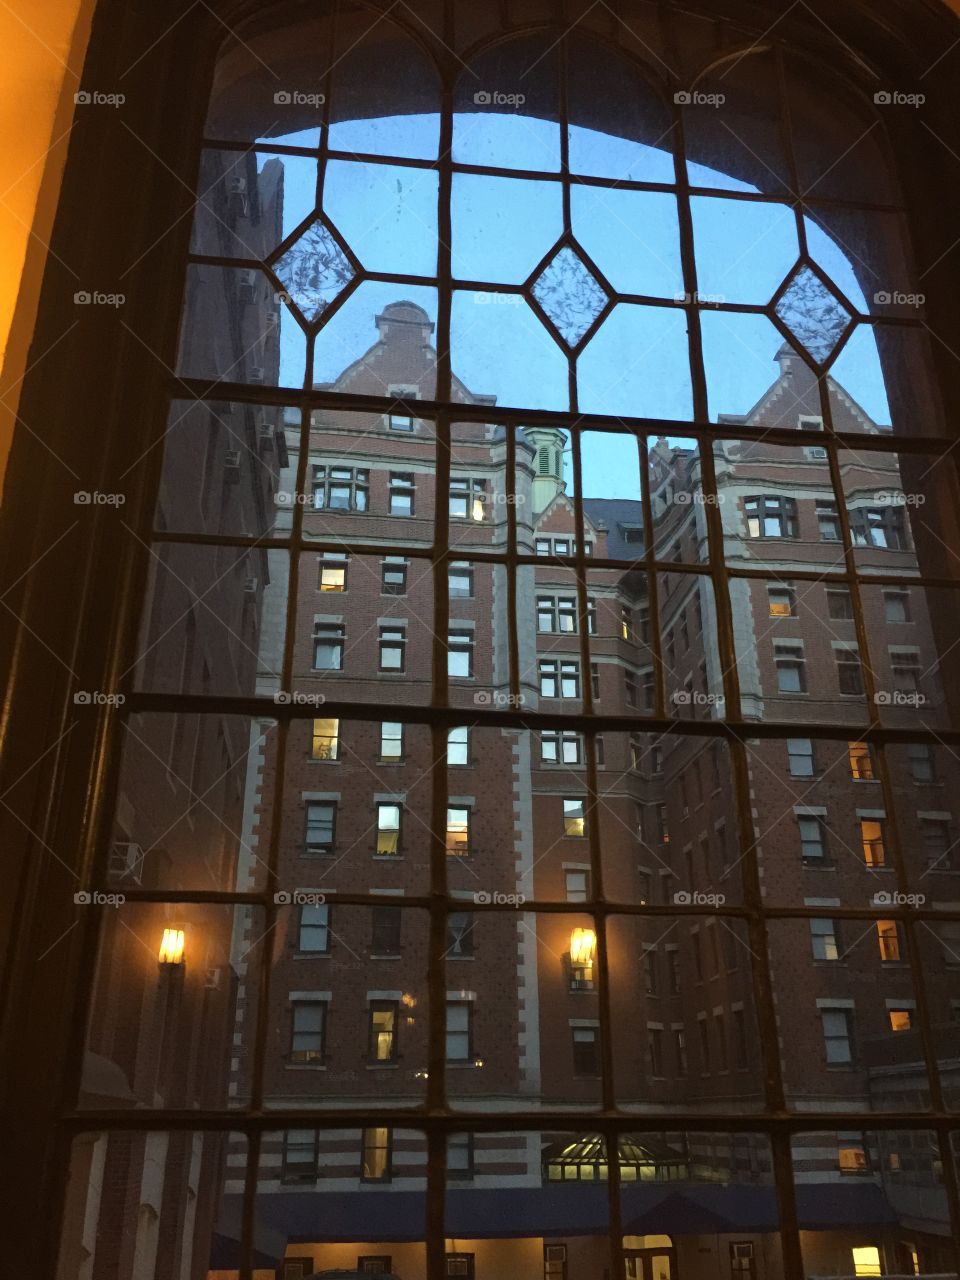 Windows Of Teachers College. From inside the Teachers College, NYC